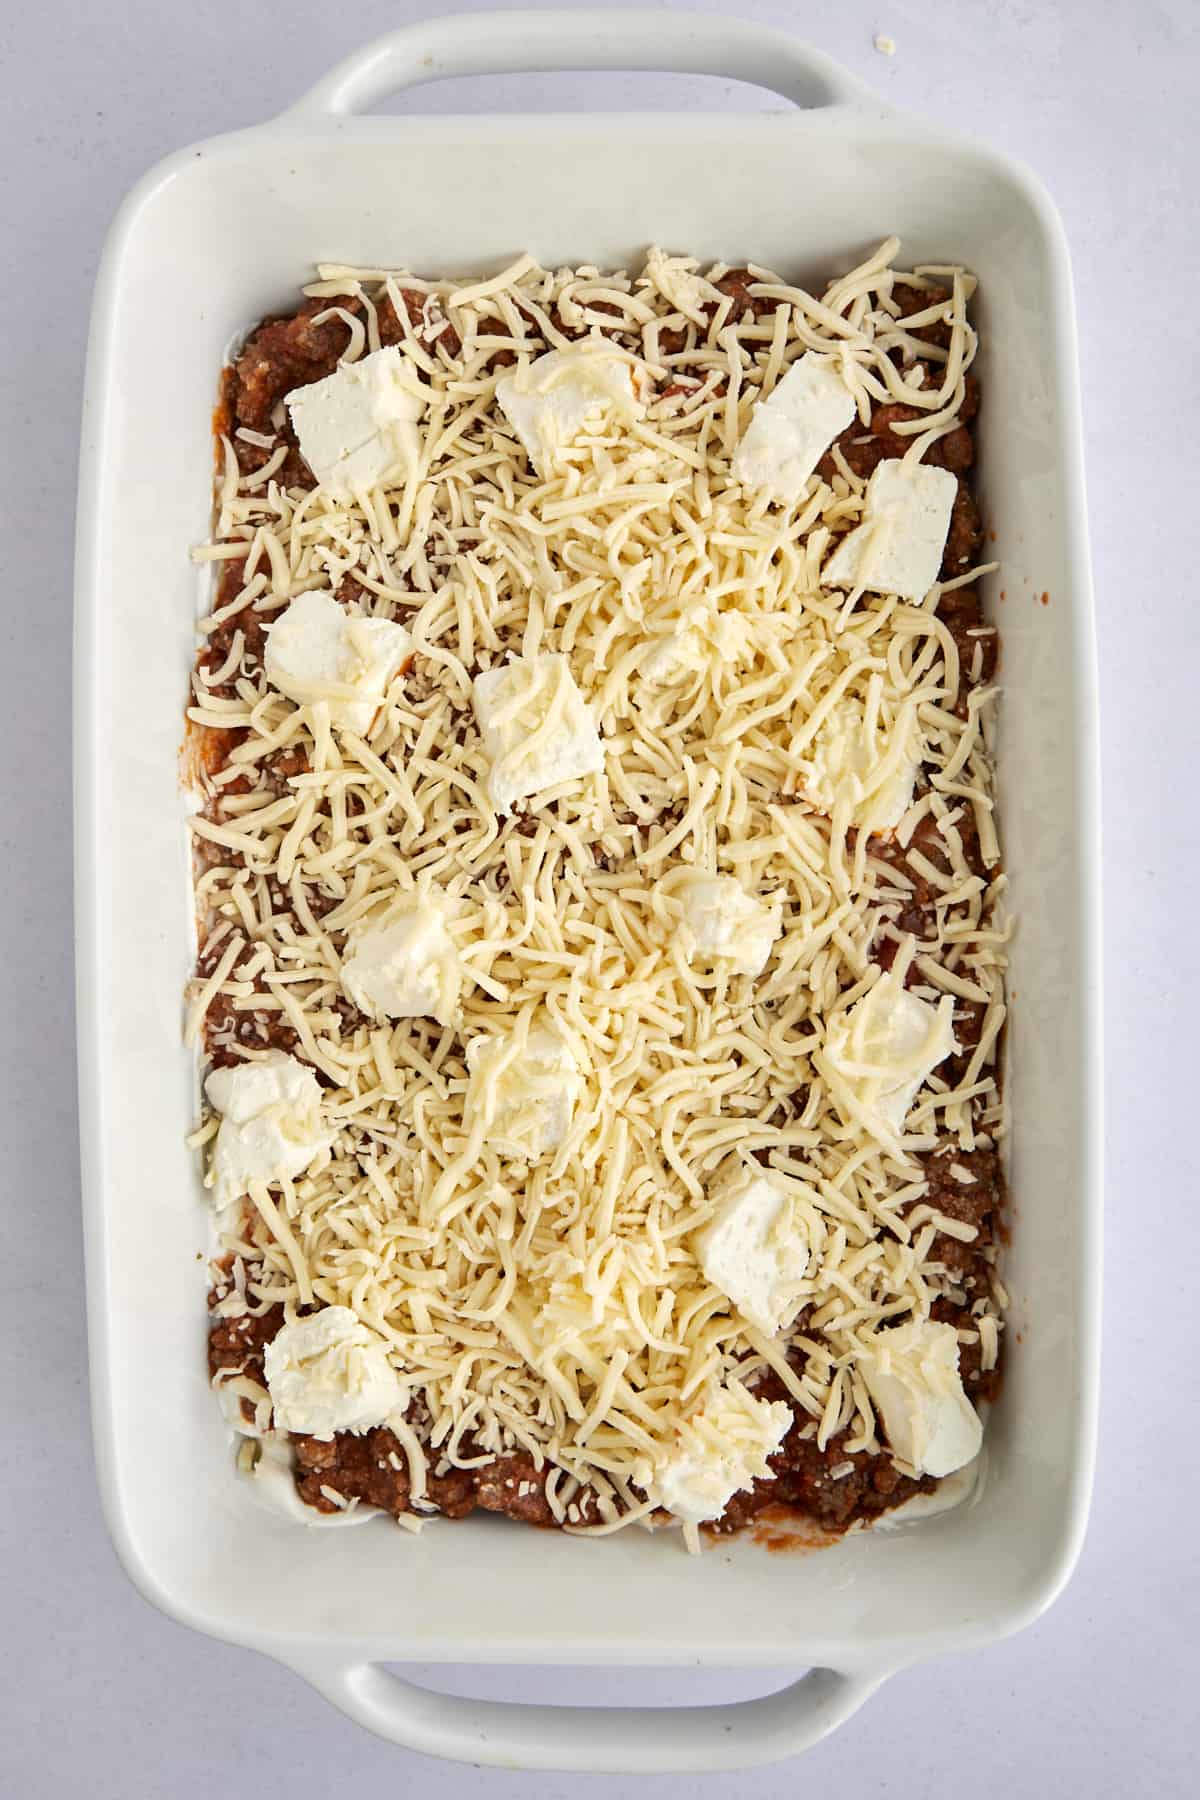 unbaked million dollar spaghetti topped with chunks of cheese and shredded mozzarella.